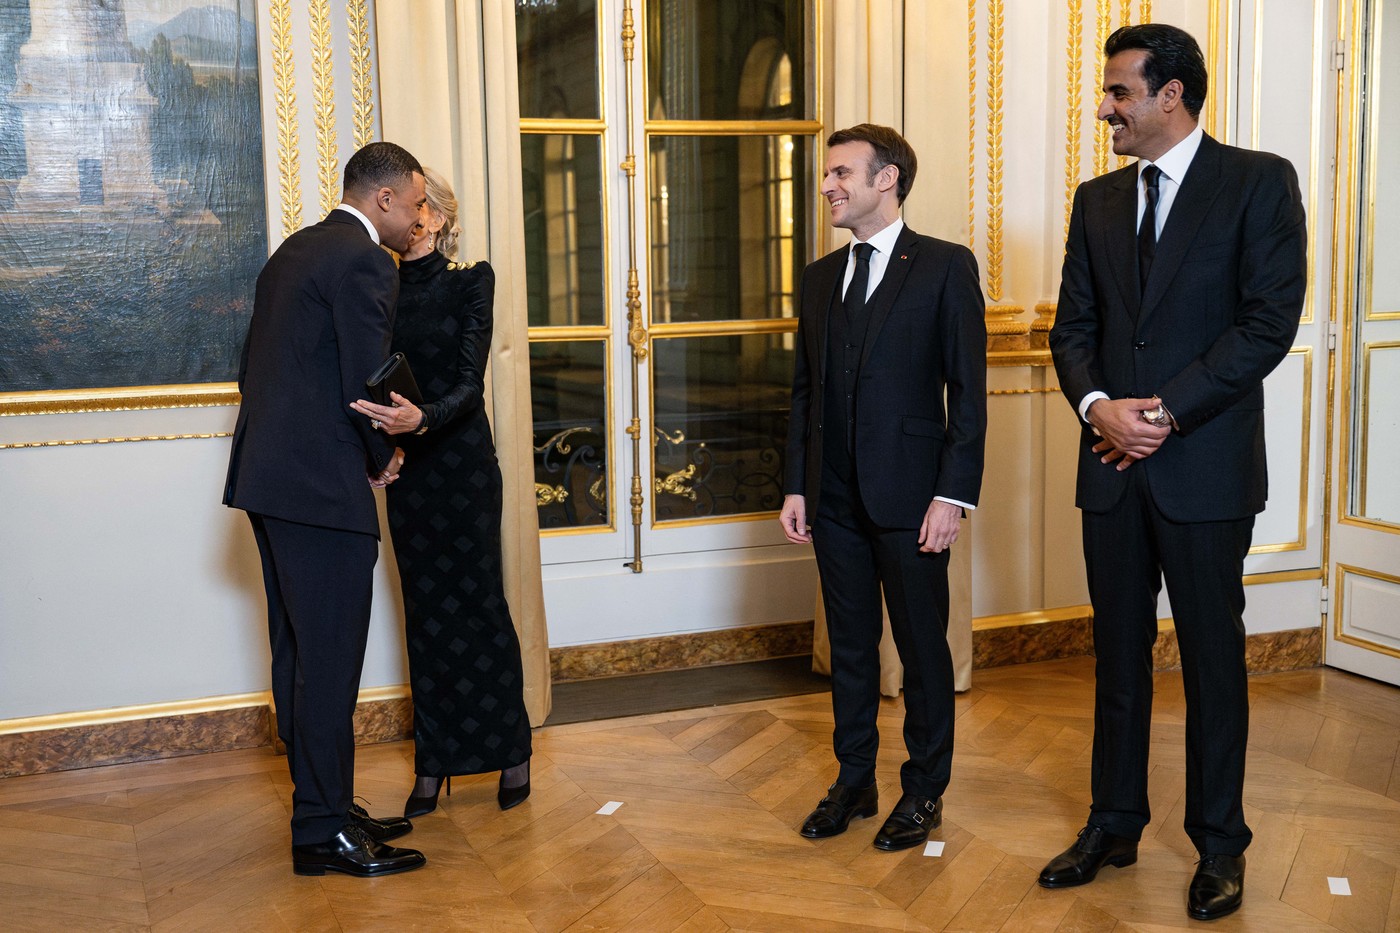 Kylian Mbappe, Brigitte Macron, President Emmanuel Macron, Qatar s Emir Sheikh Tamim bin Hamad al-Thani at an official dinner on the sidelines of the state visit of Emir of Qatar Sheikh Tamim bin Hamad Al Thani at the Elysee Palace in Paris, France on February 27, 2024.,Image: 851708422, License: Rights-managed, Restrictions: , Model Release: no